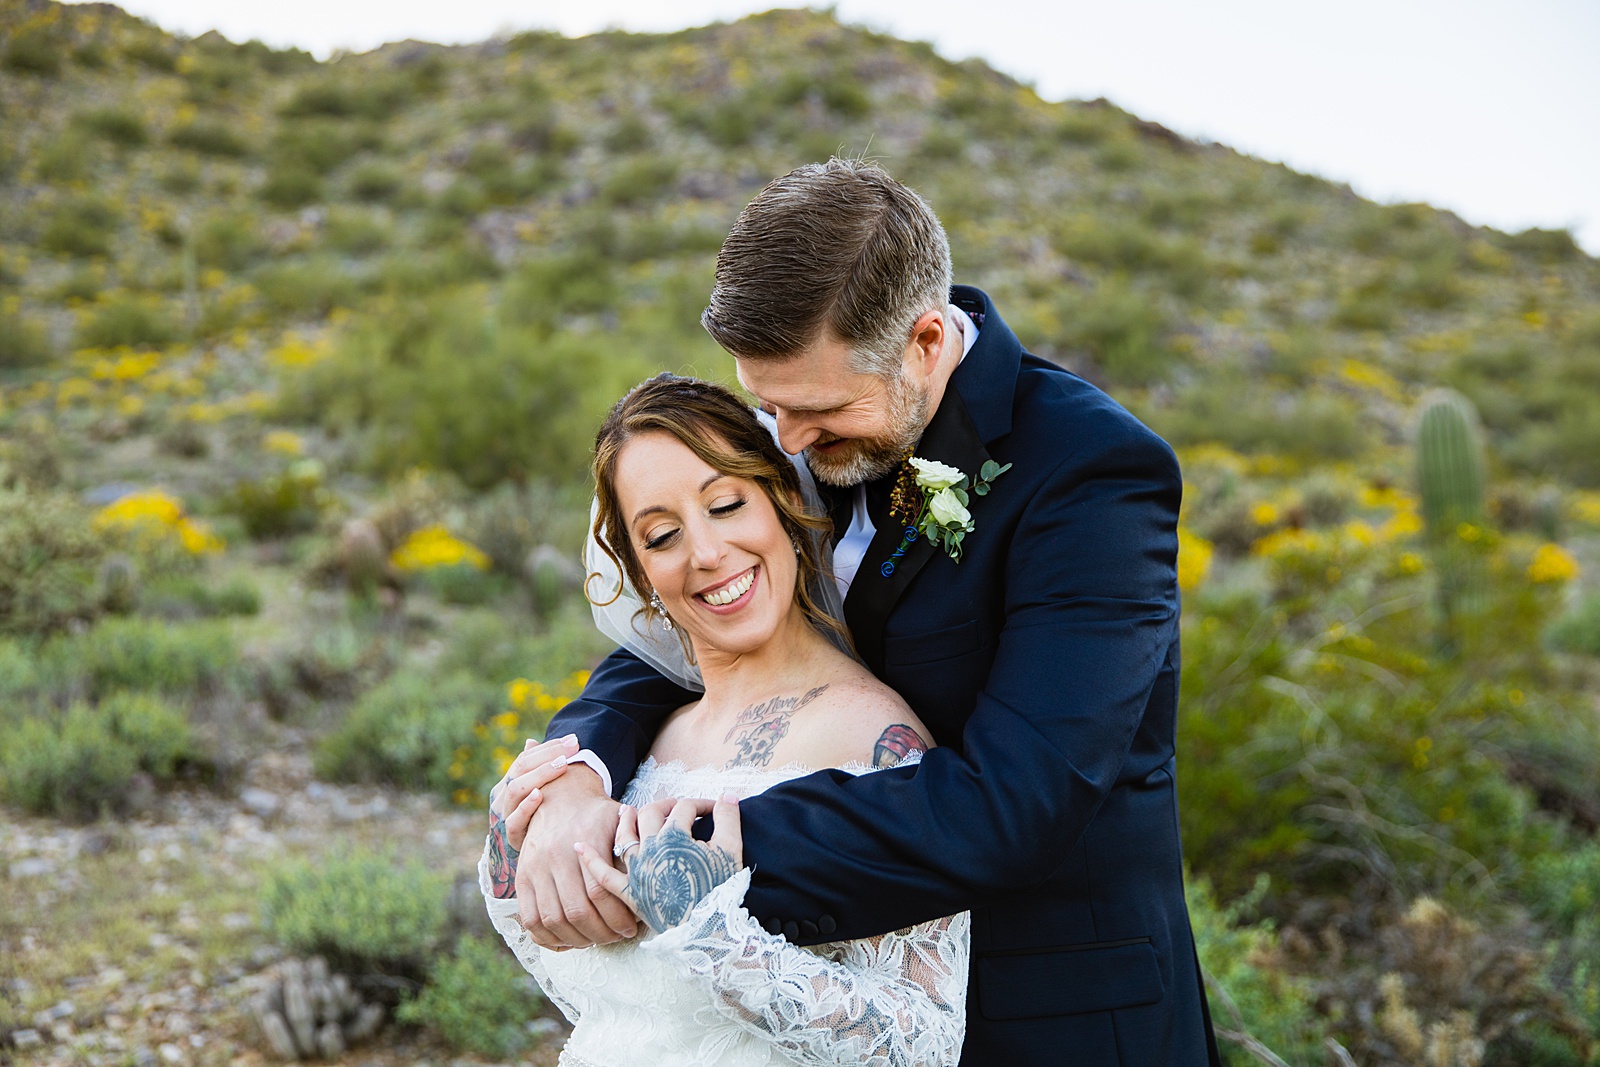 Bride and groom laughing together during their backyard wedding by Scottsdale wedding photographer PMA Photography.